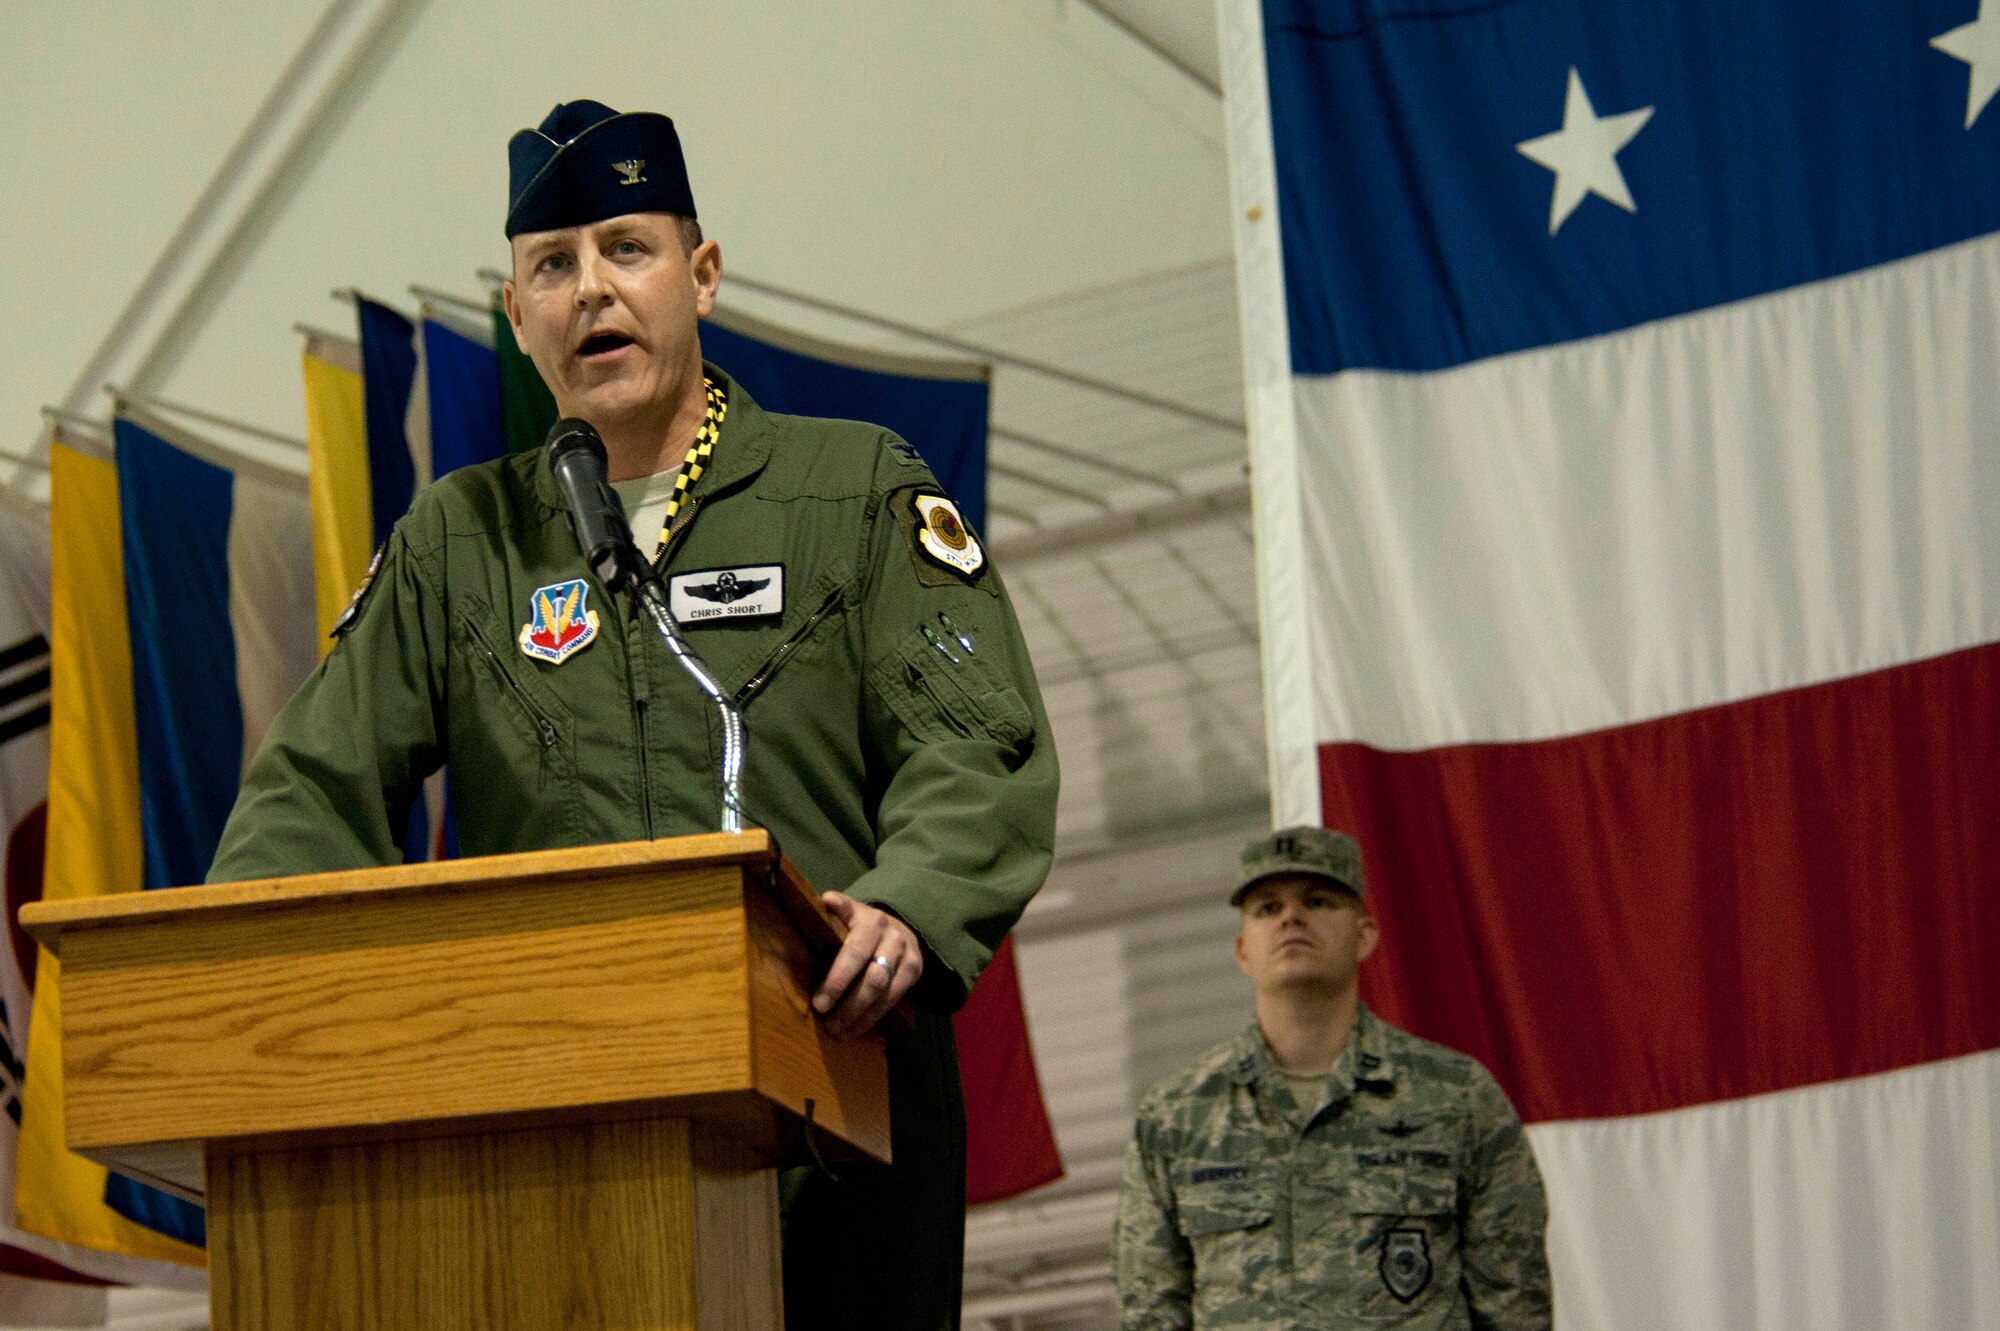 Col. Christopher Short, 57th Wing commander, speaks to  Airmen during the 57th WG change of command ceremony in the Thunderbird hanger Feb. 28, 2014 at Nellis Air Force Base, Nev.  Short is responsible for 39 squadrons at 12 installations comprising the Air Force's most diverse flying wing. (U.S. Air Force photo by Airman 1st Class Timothy Young)